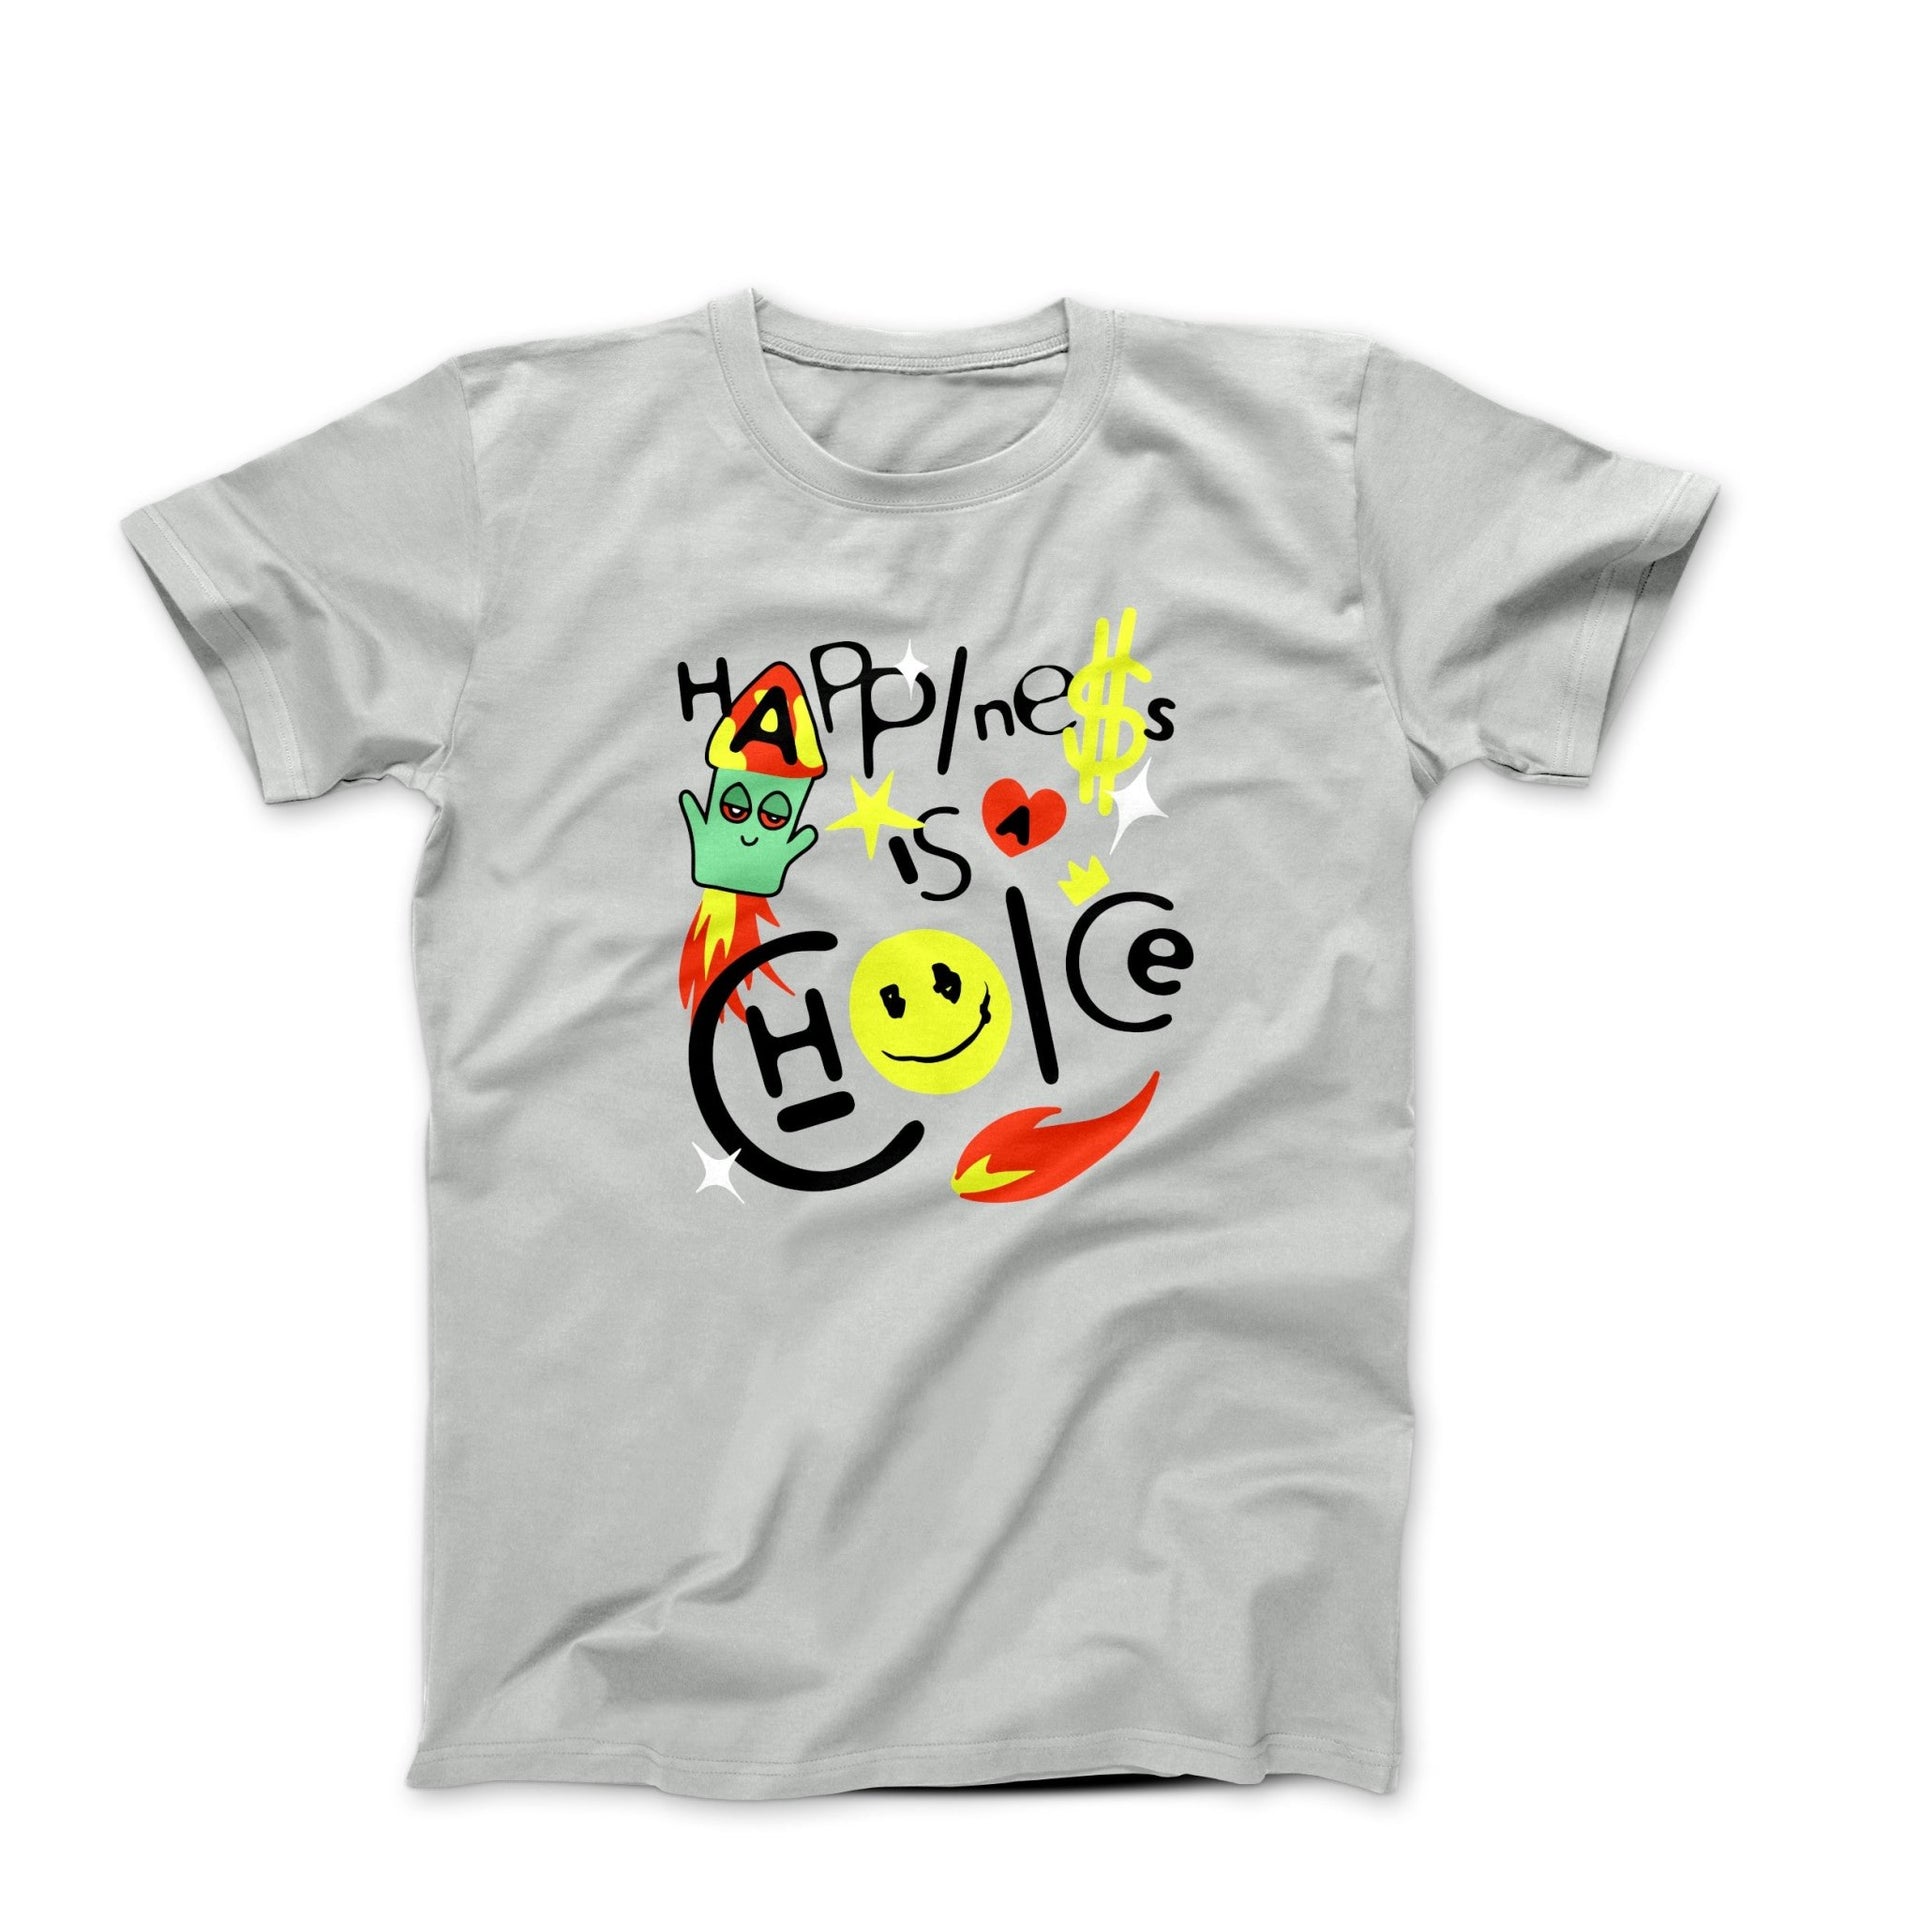 Happiness Is A Choice Graphic Art T-shirt - Clothing - Harvey Ltd